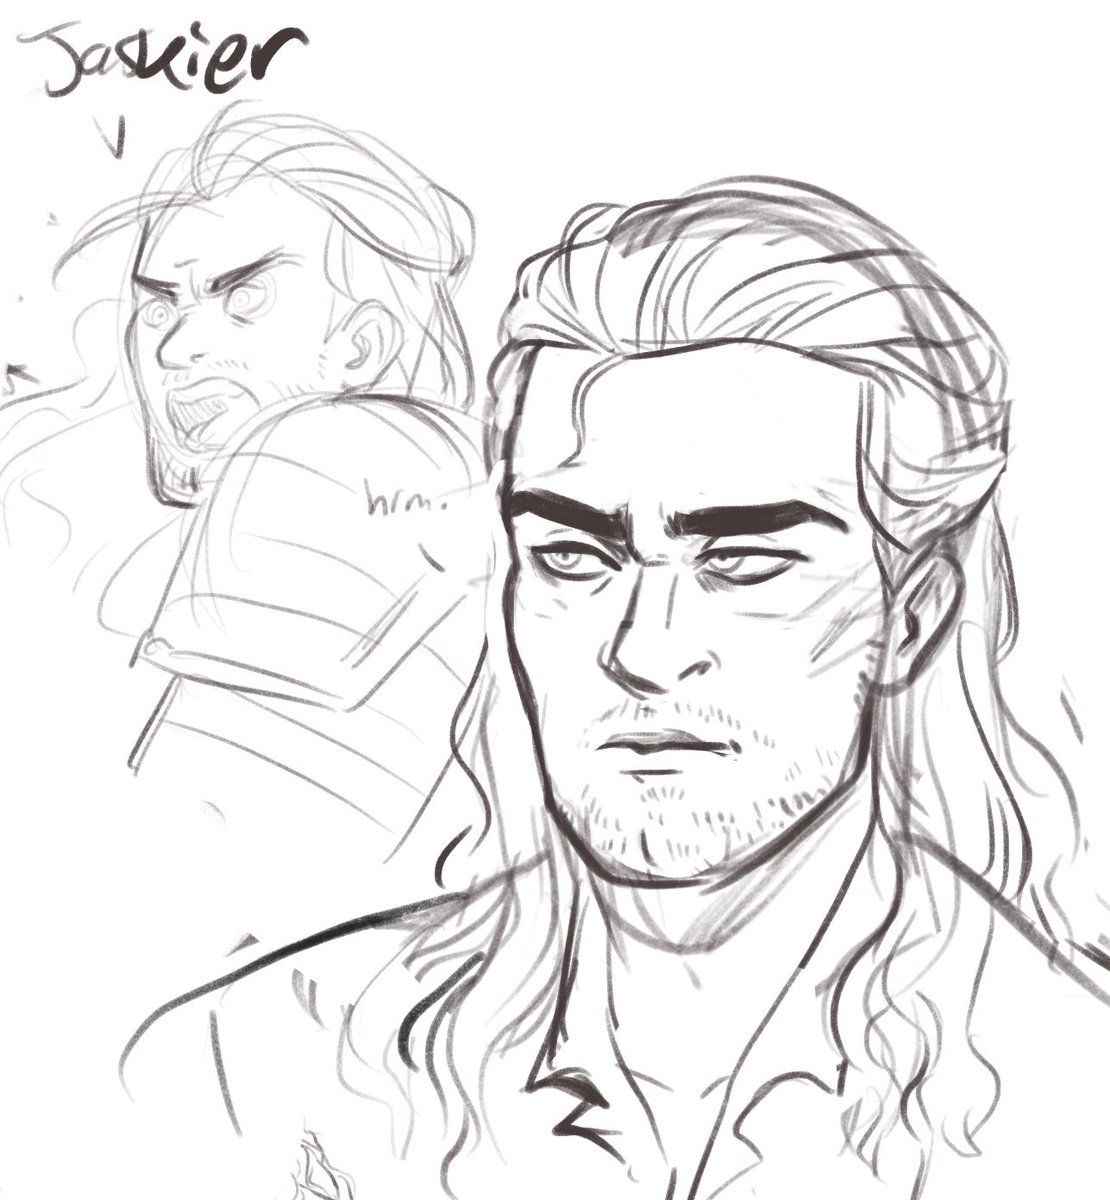 Haven't had time to make any proper art but here's some jaskier and geralt doodles 